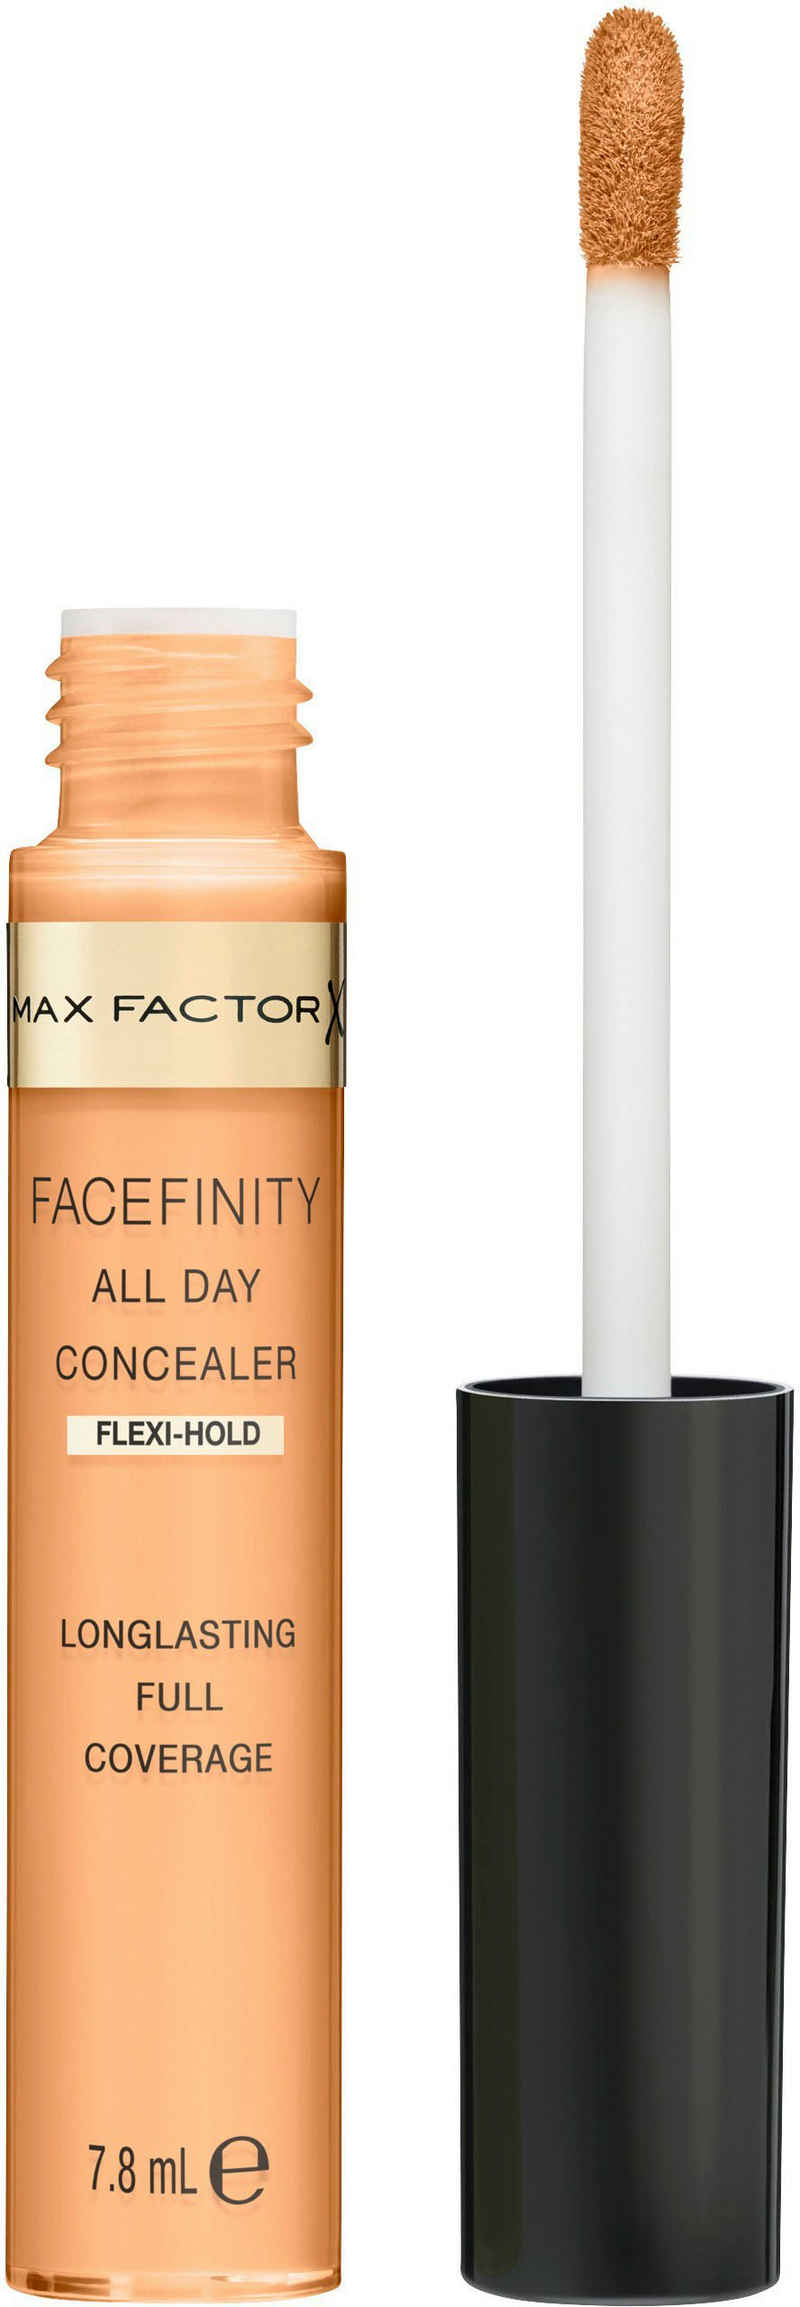 MAX FACTOR Concealer FACEFINITY All Day Flawless